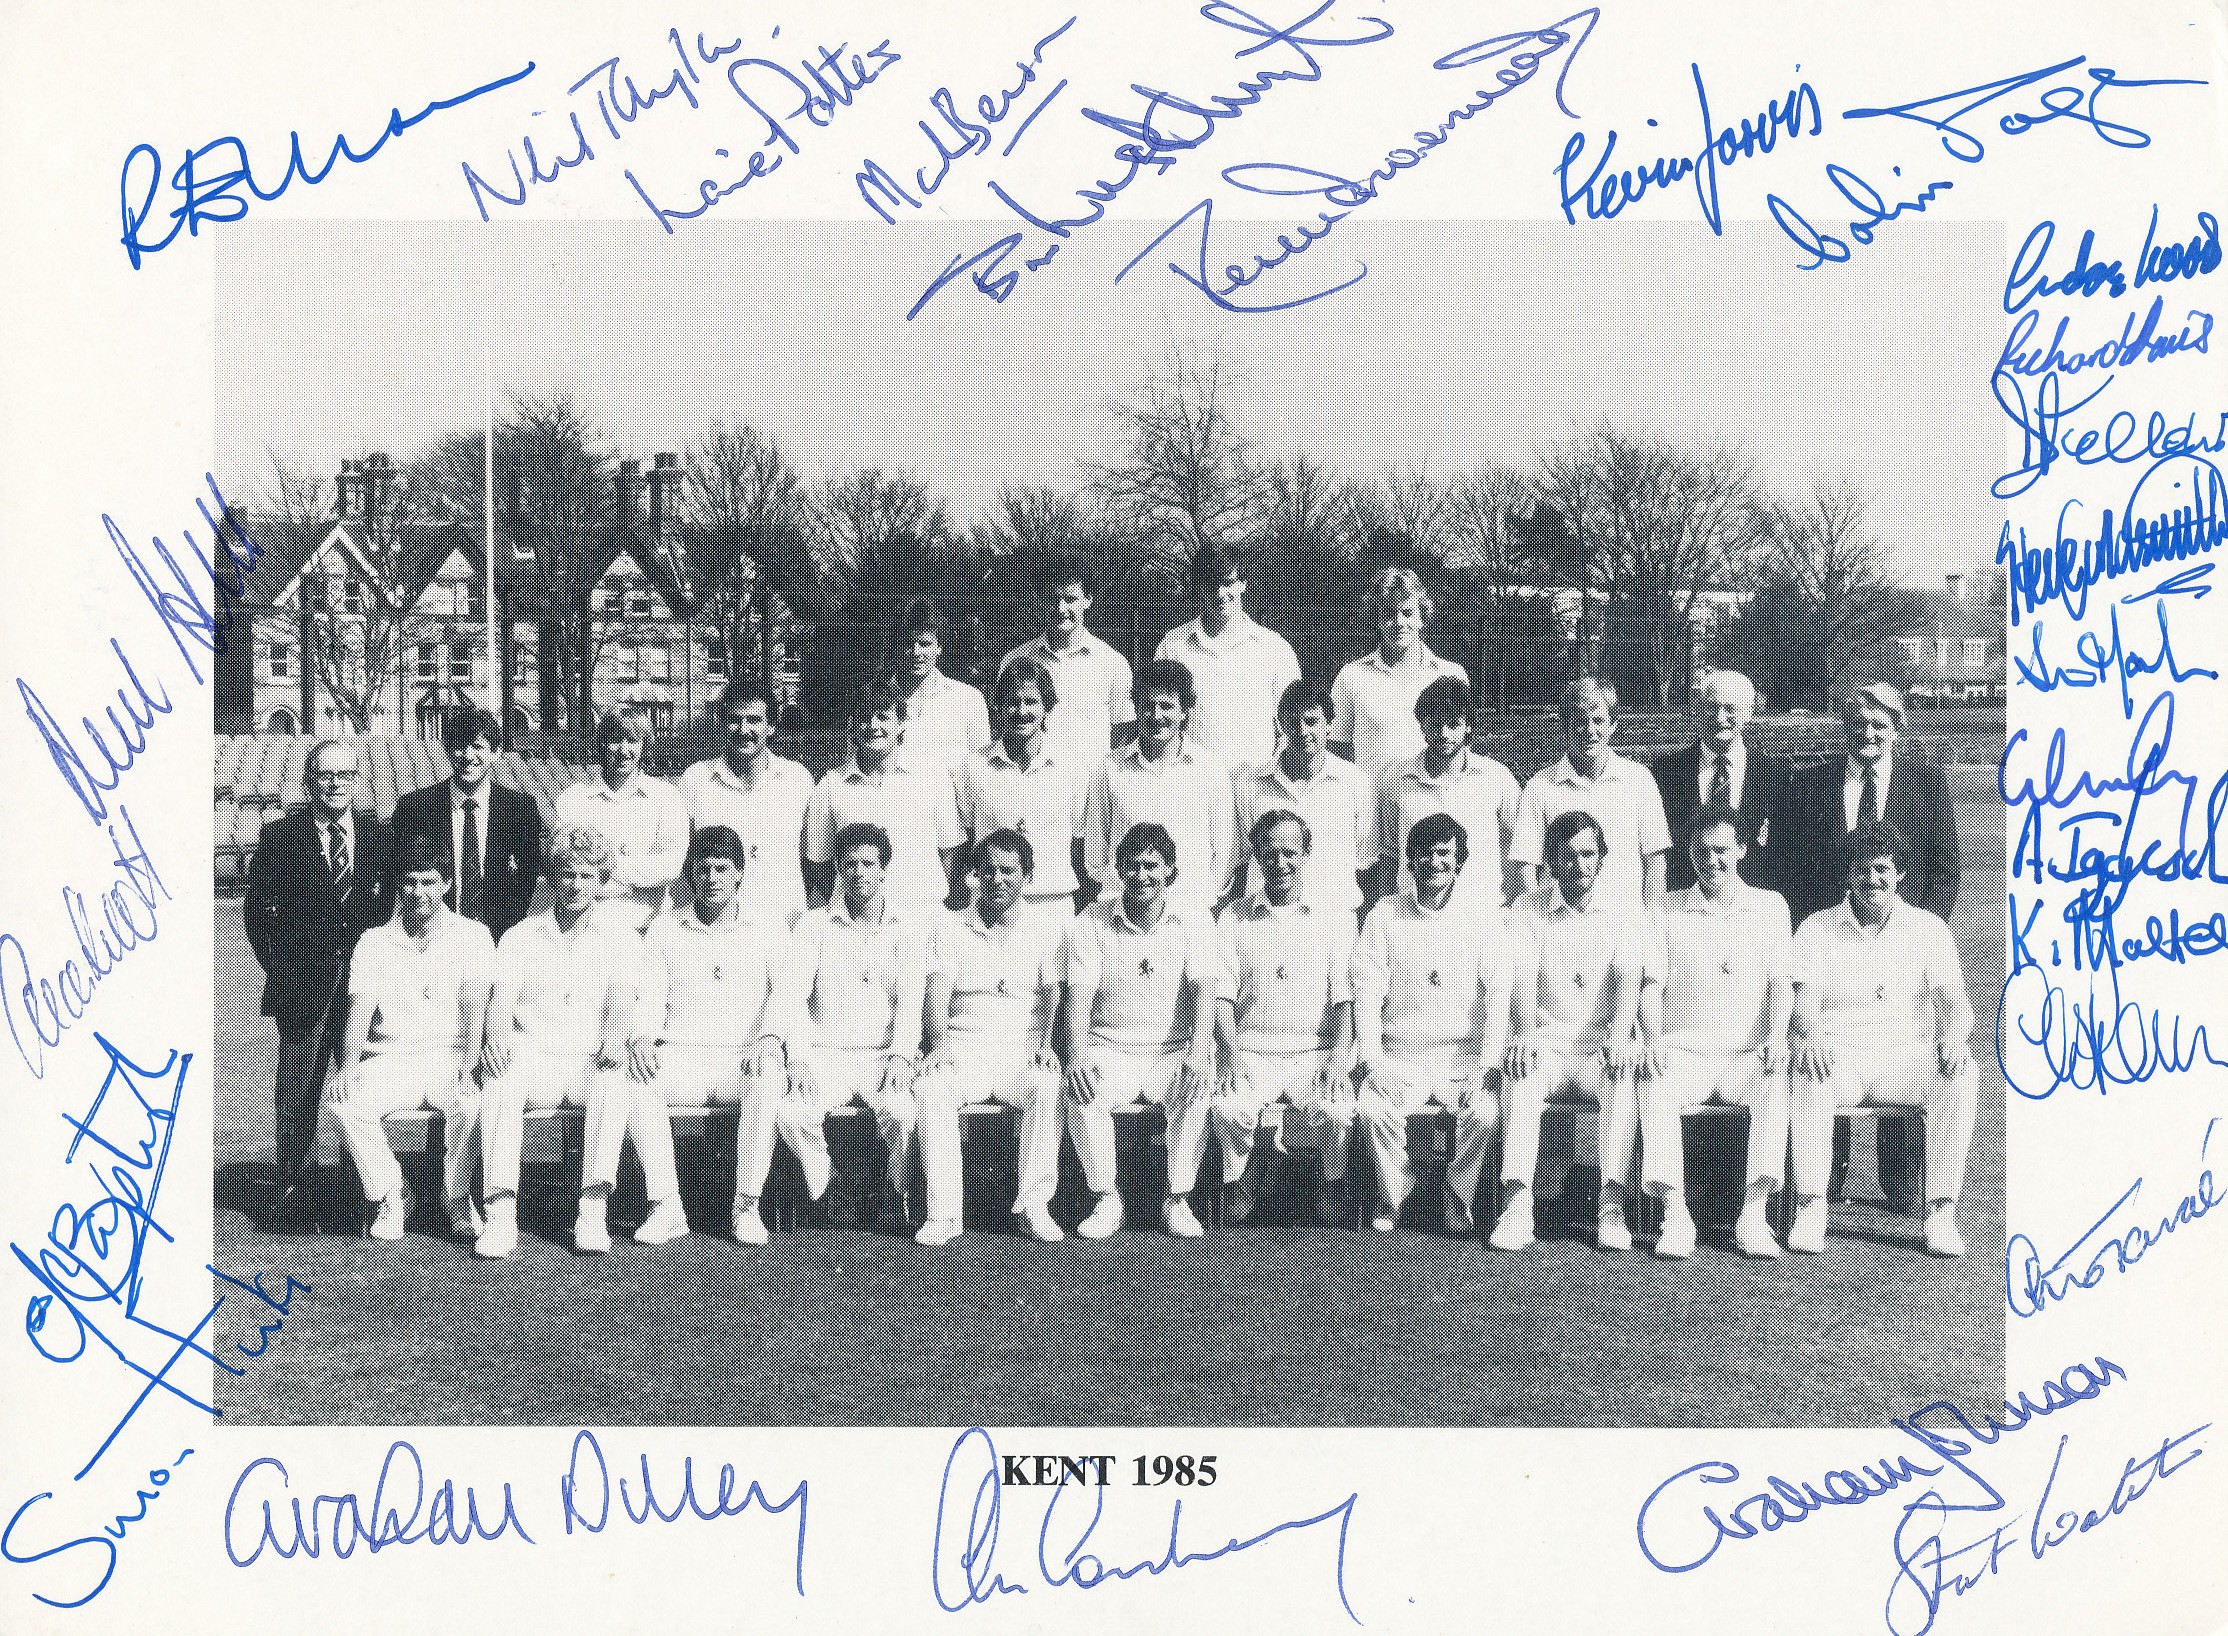 KENT, a 7.5" x 5.5" photo of the 1985 side, signed by 27 players and staff, inc Colin Cowdrey,